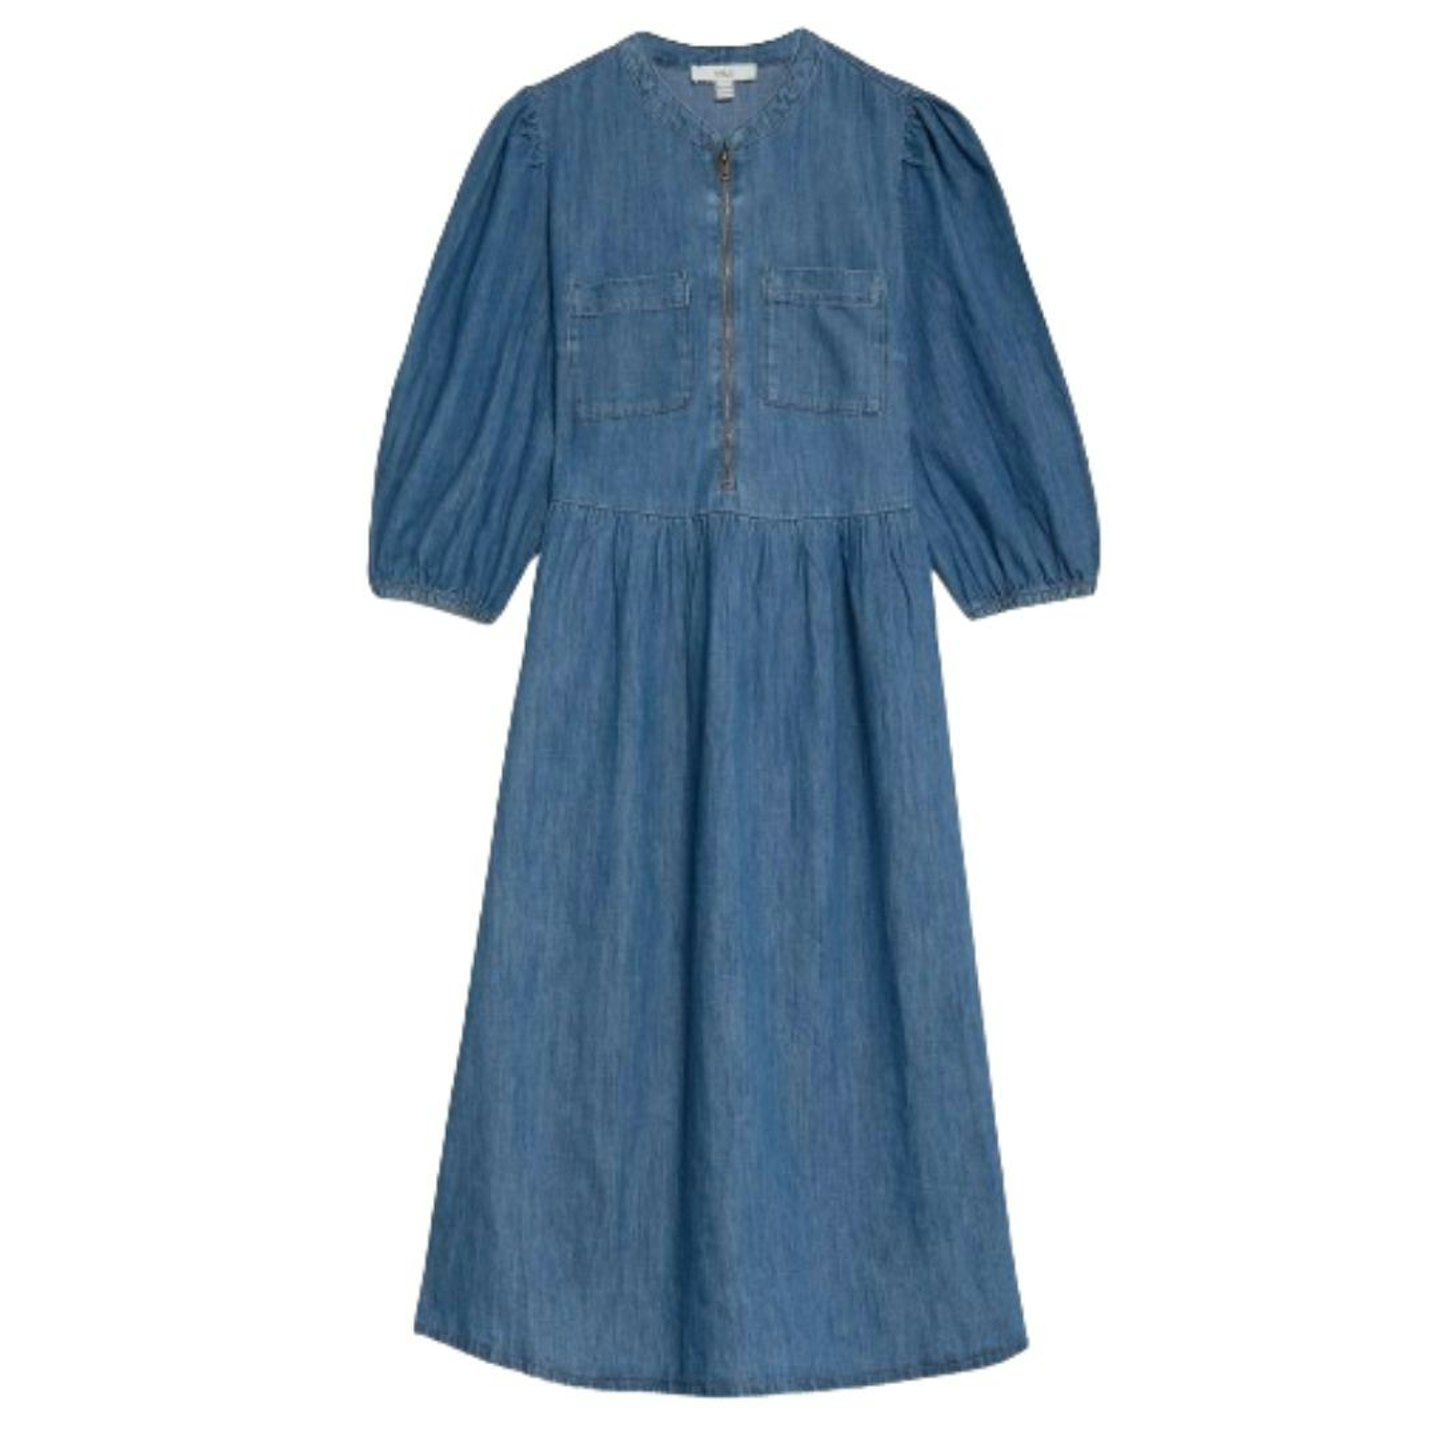 The best Marks and Spencer dresses: Pure Cotton Denim Midi Waisted Dress